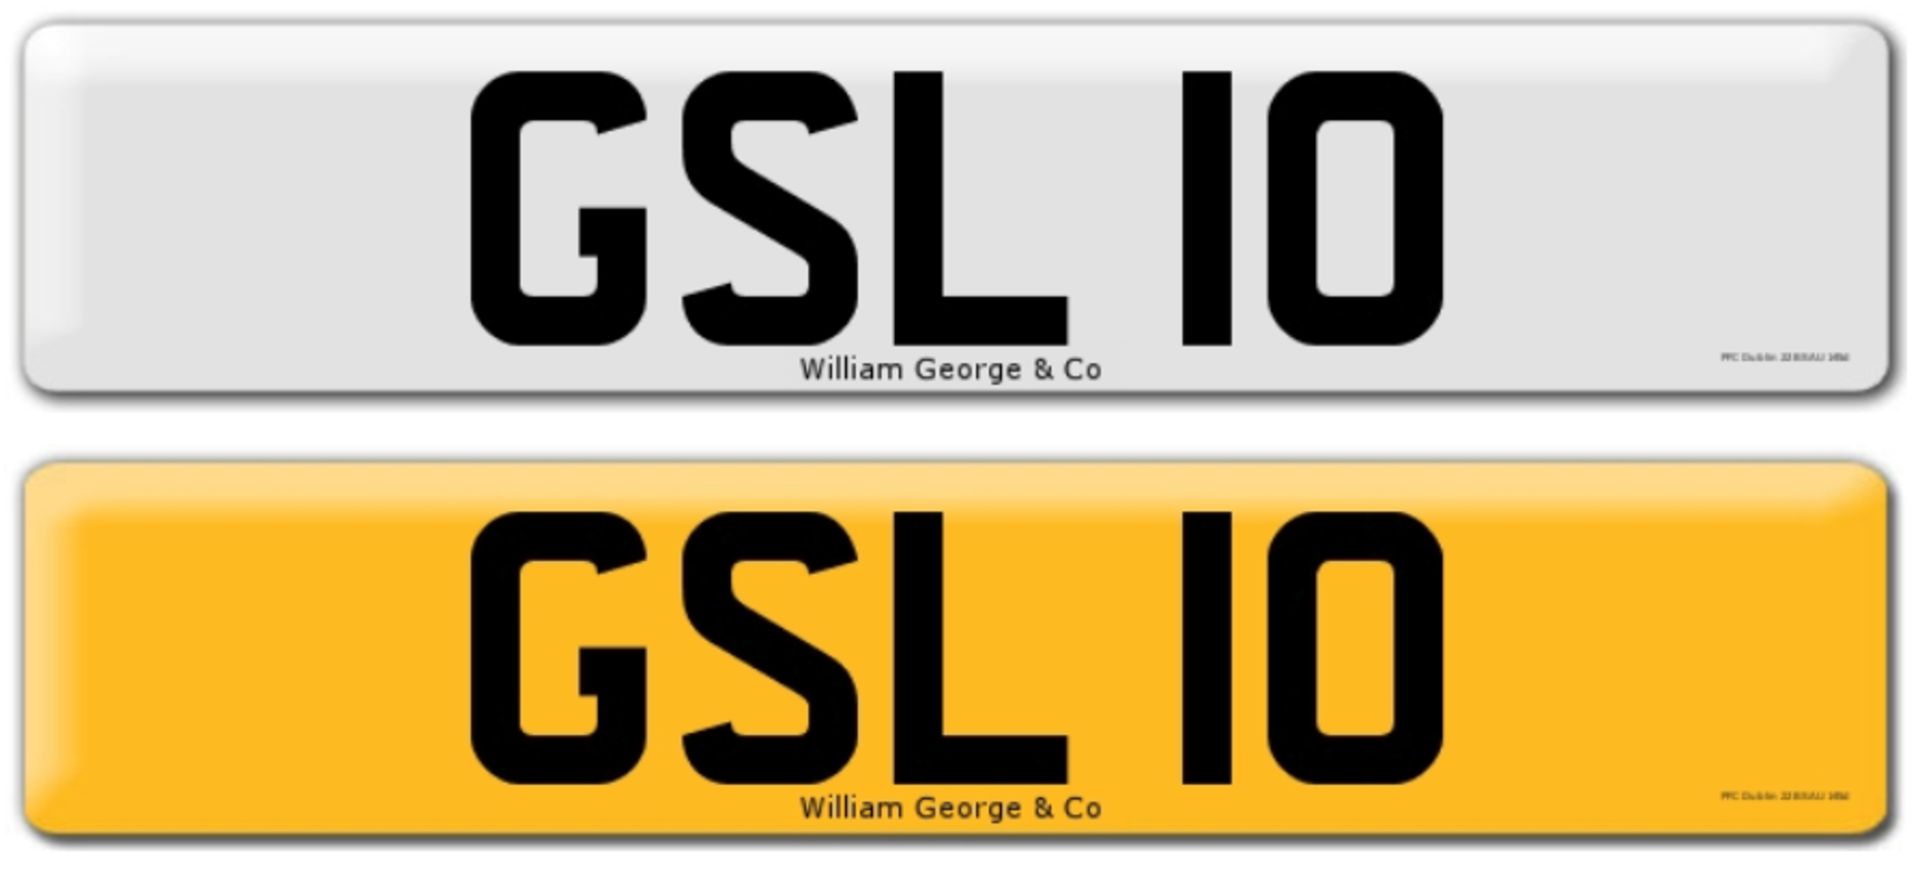 Registration on DVLA retention certificate, ready to transfer GSL 10, This number plate /